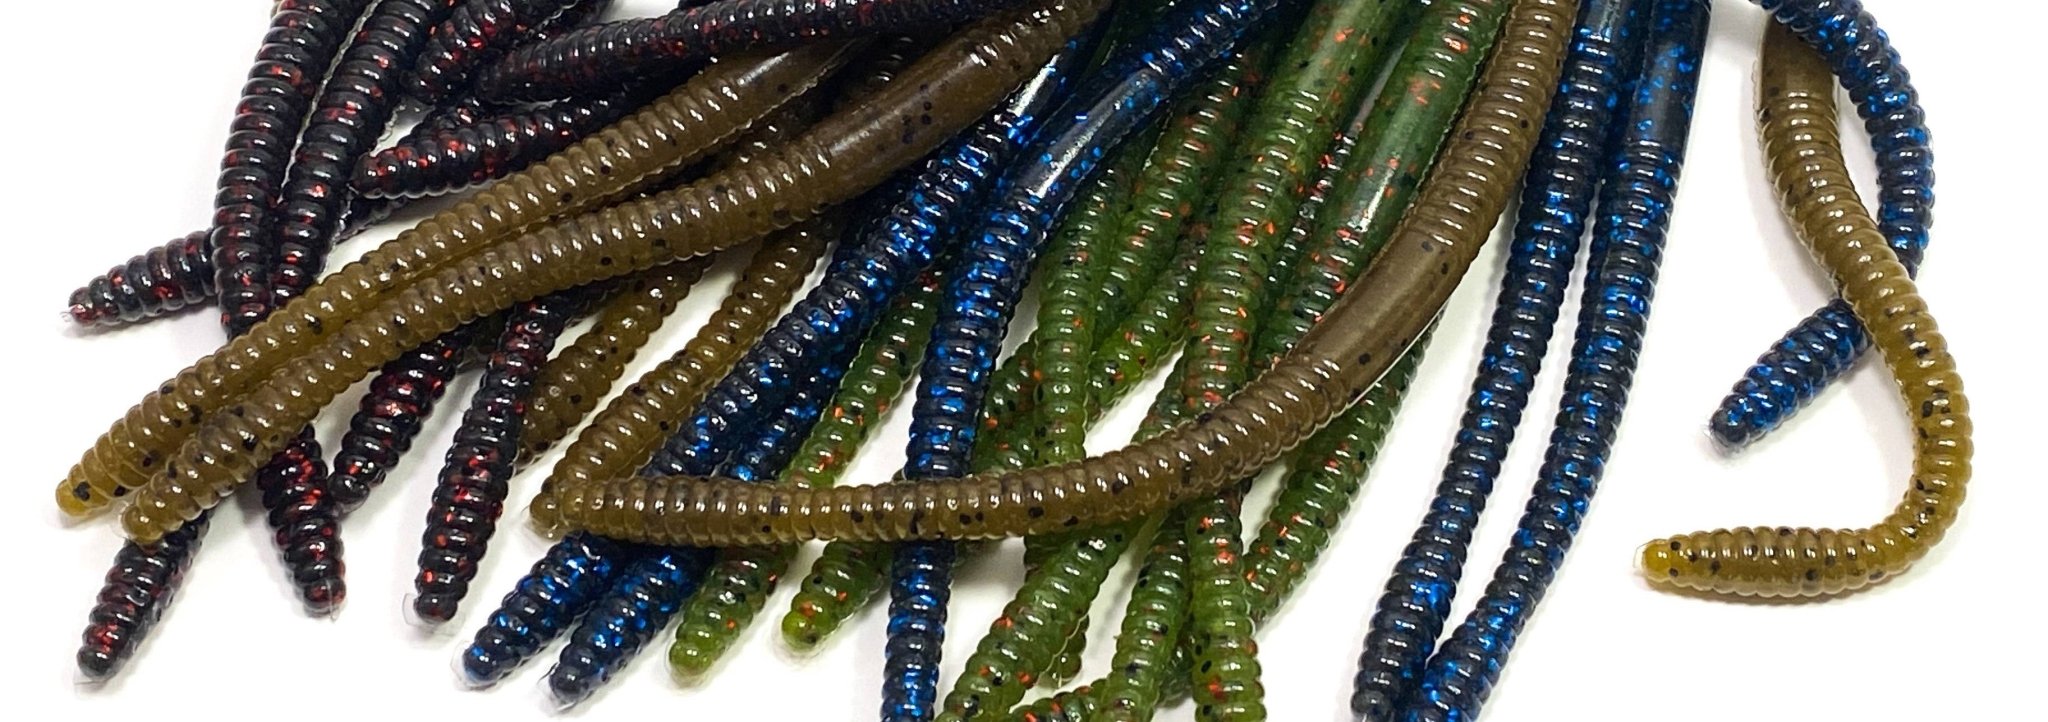 Soft Plastic Worms For Largemouth Bass Fishing